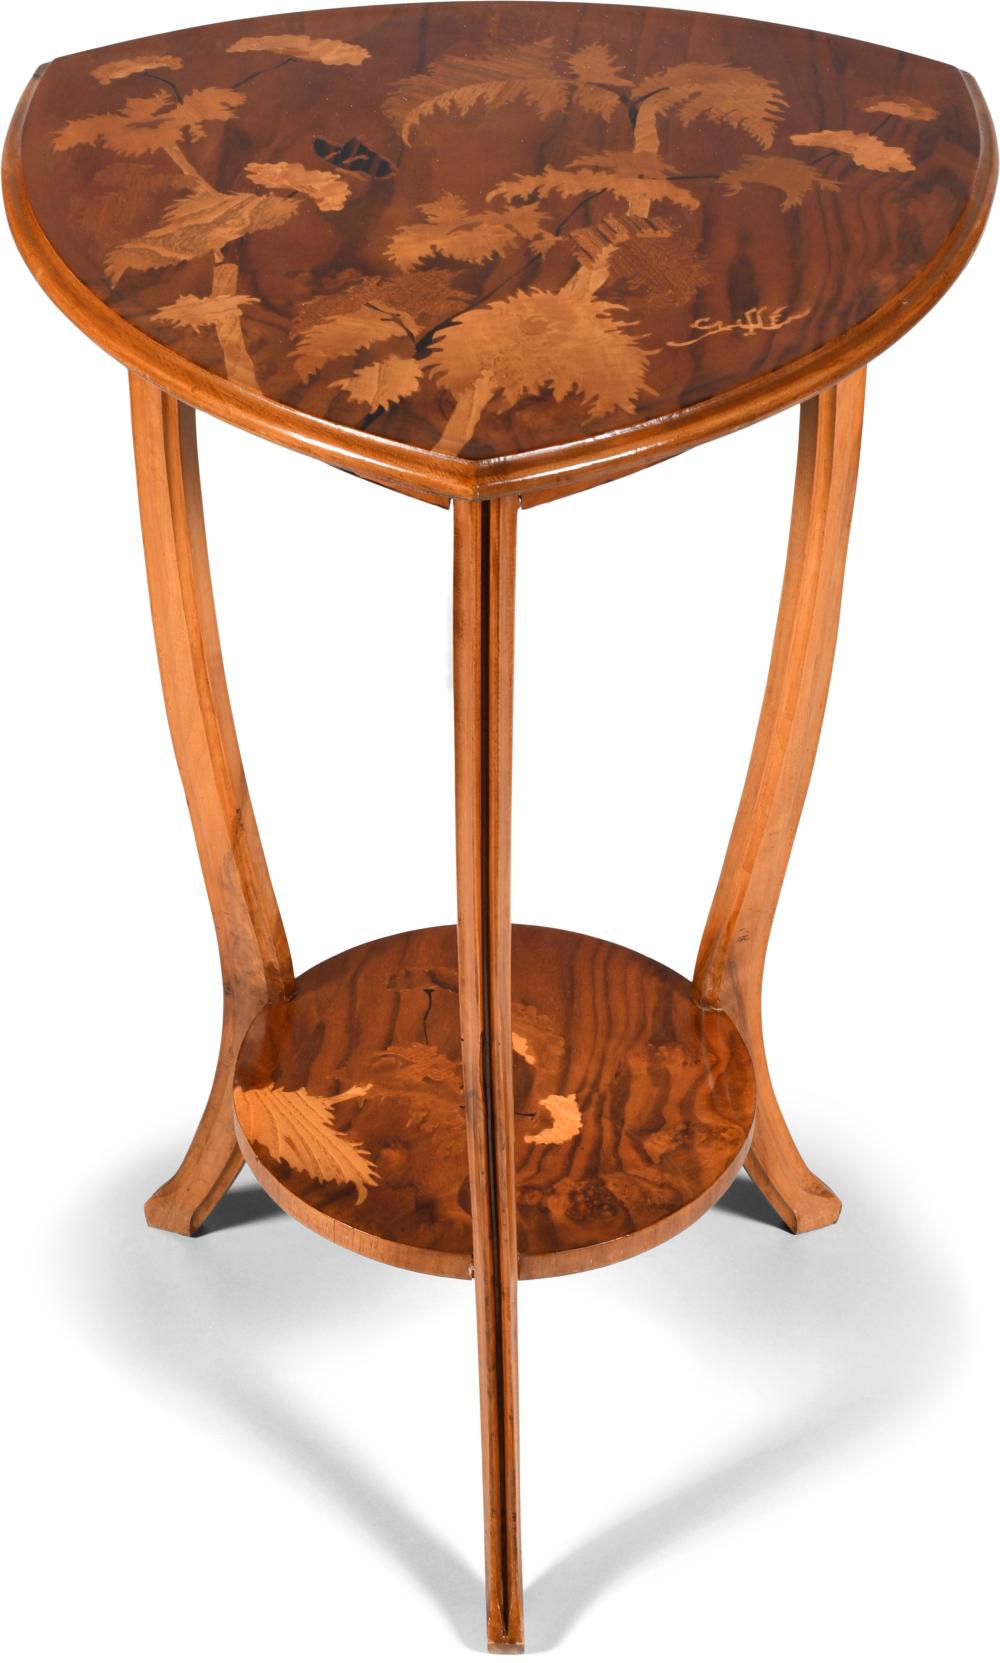 EMILE GALLE MARQUETRY INLAID WALNUT 33d8a2